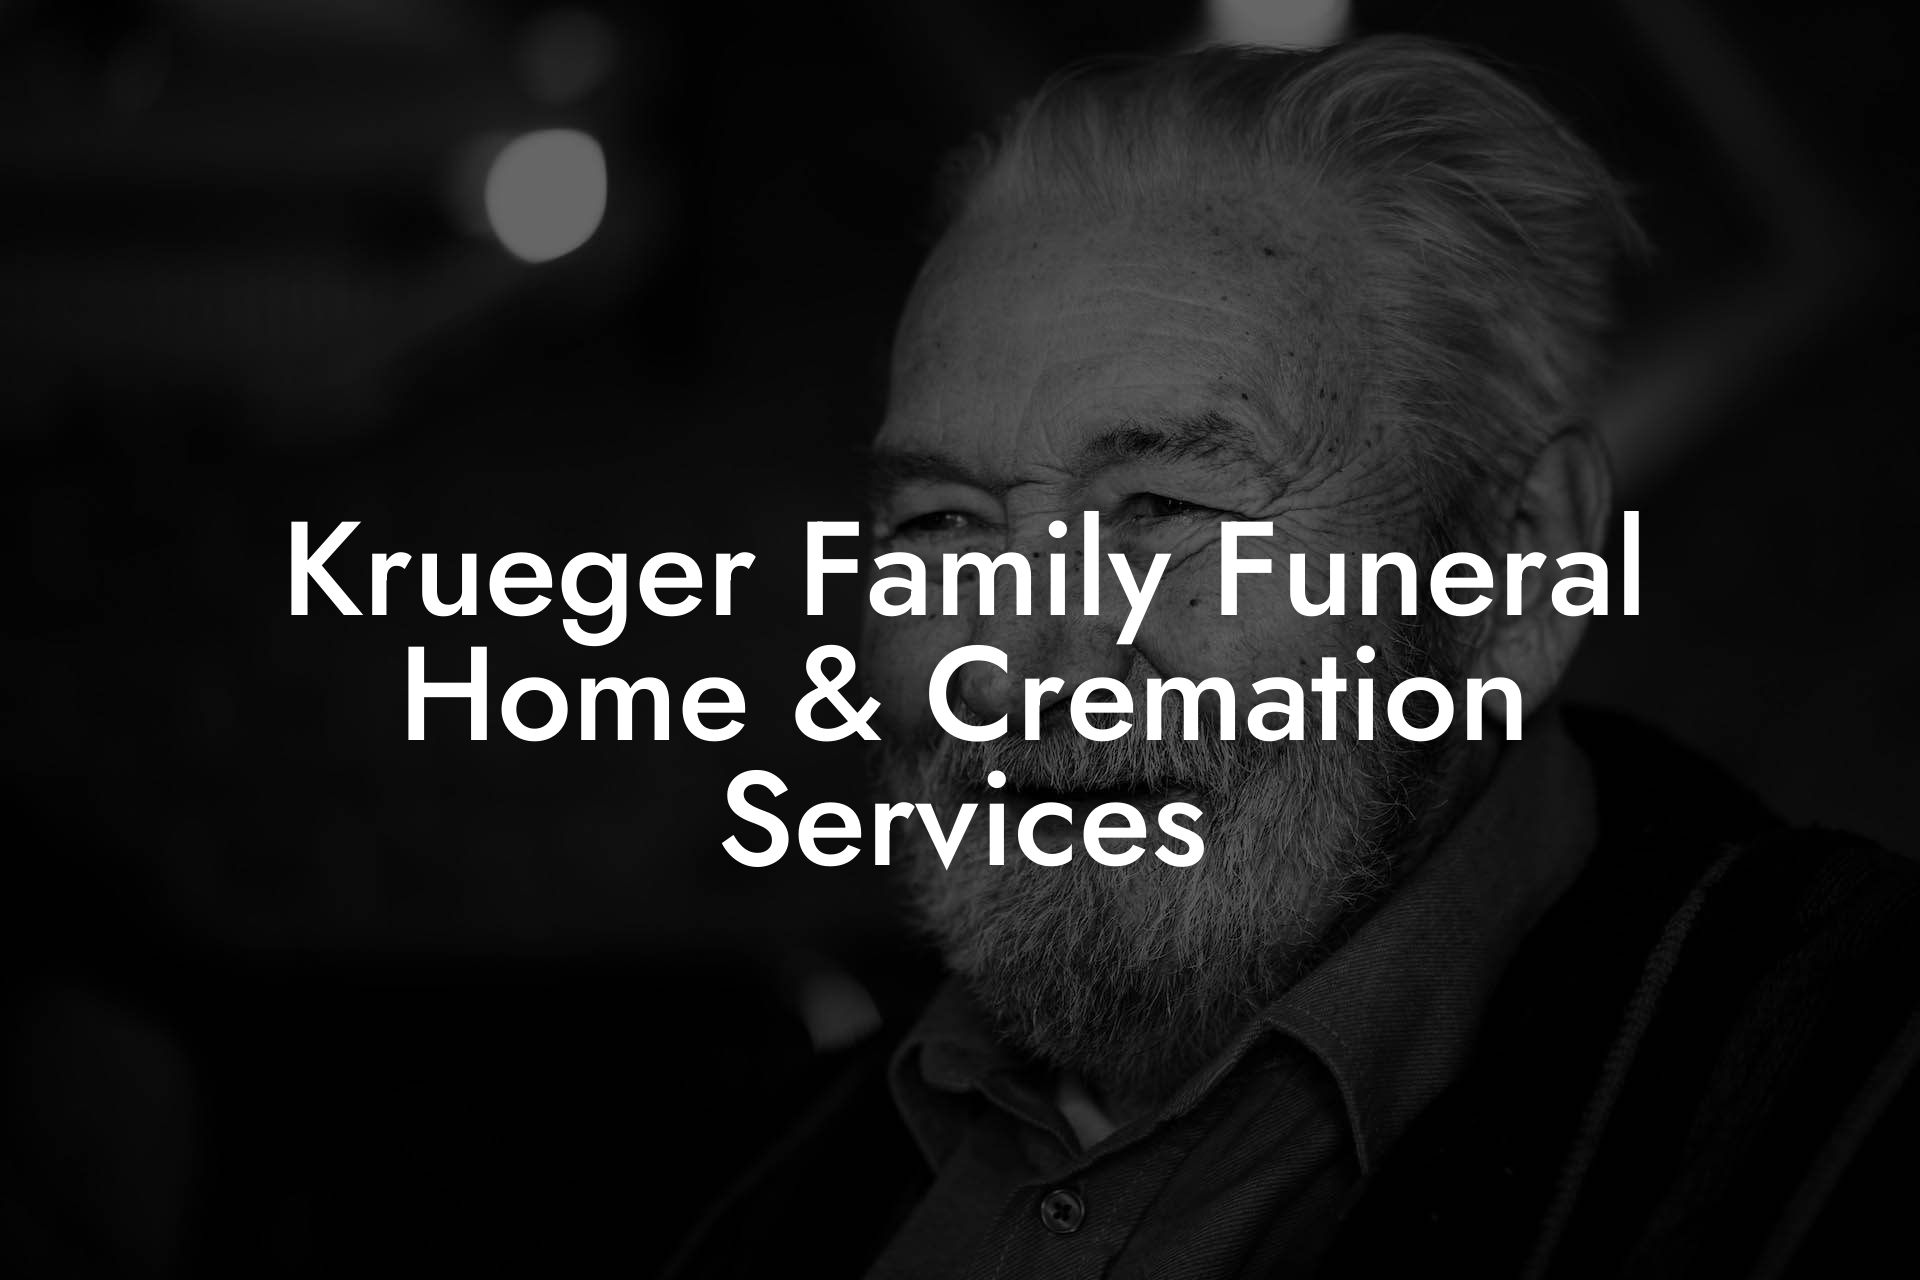 Krueger Family Funeral Home & Cremation Services